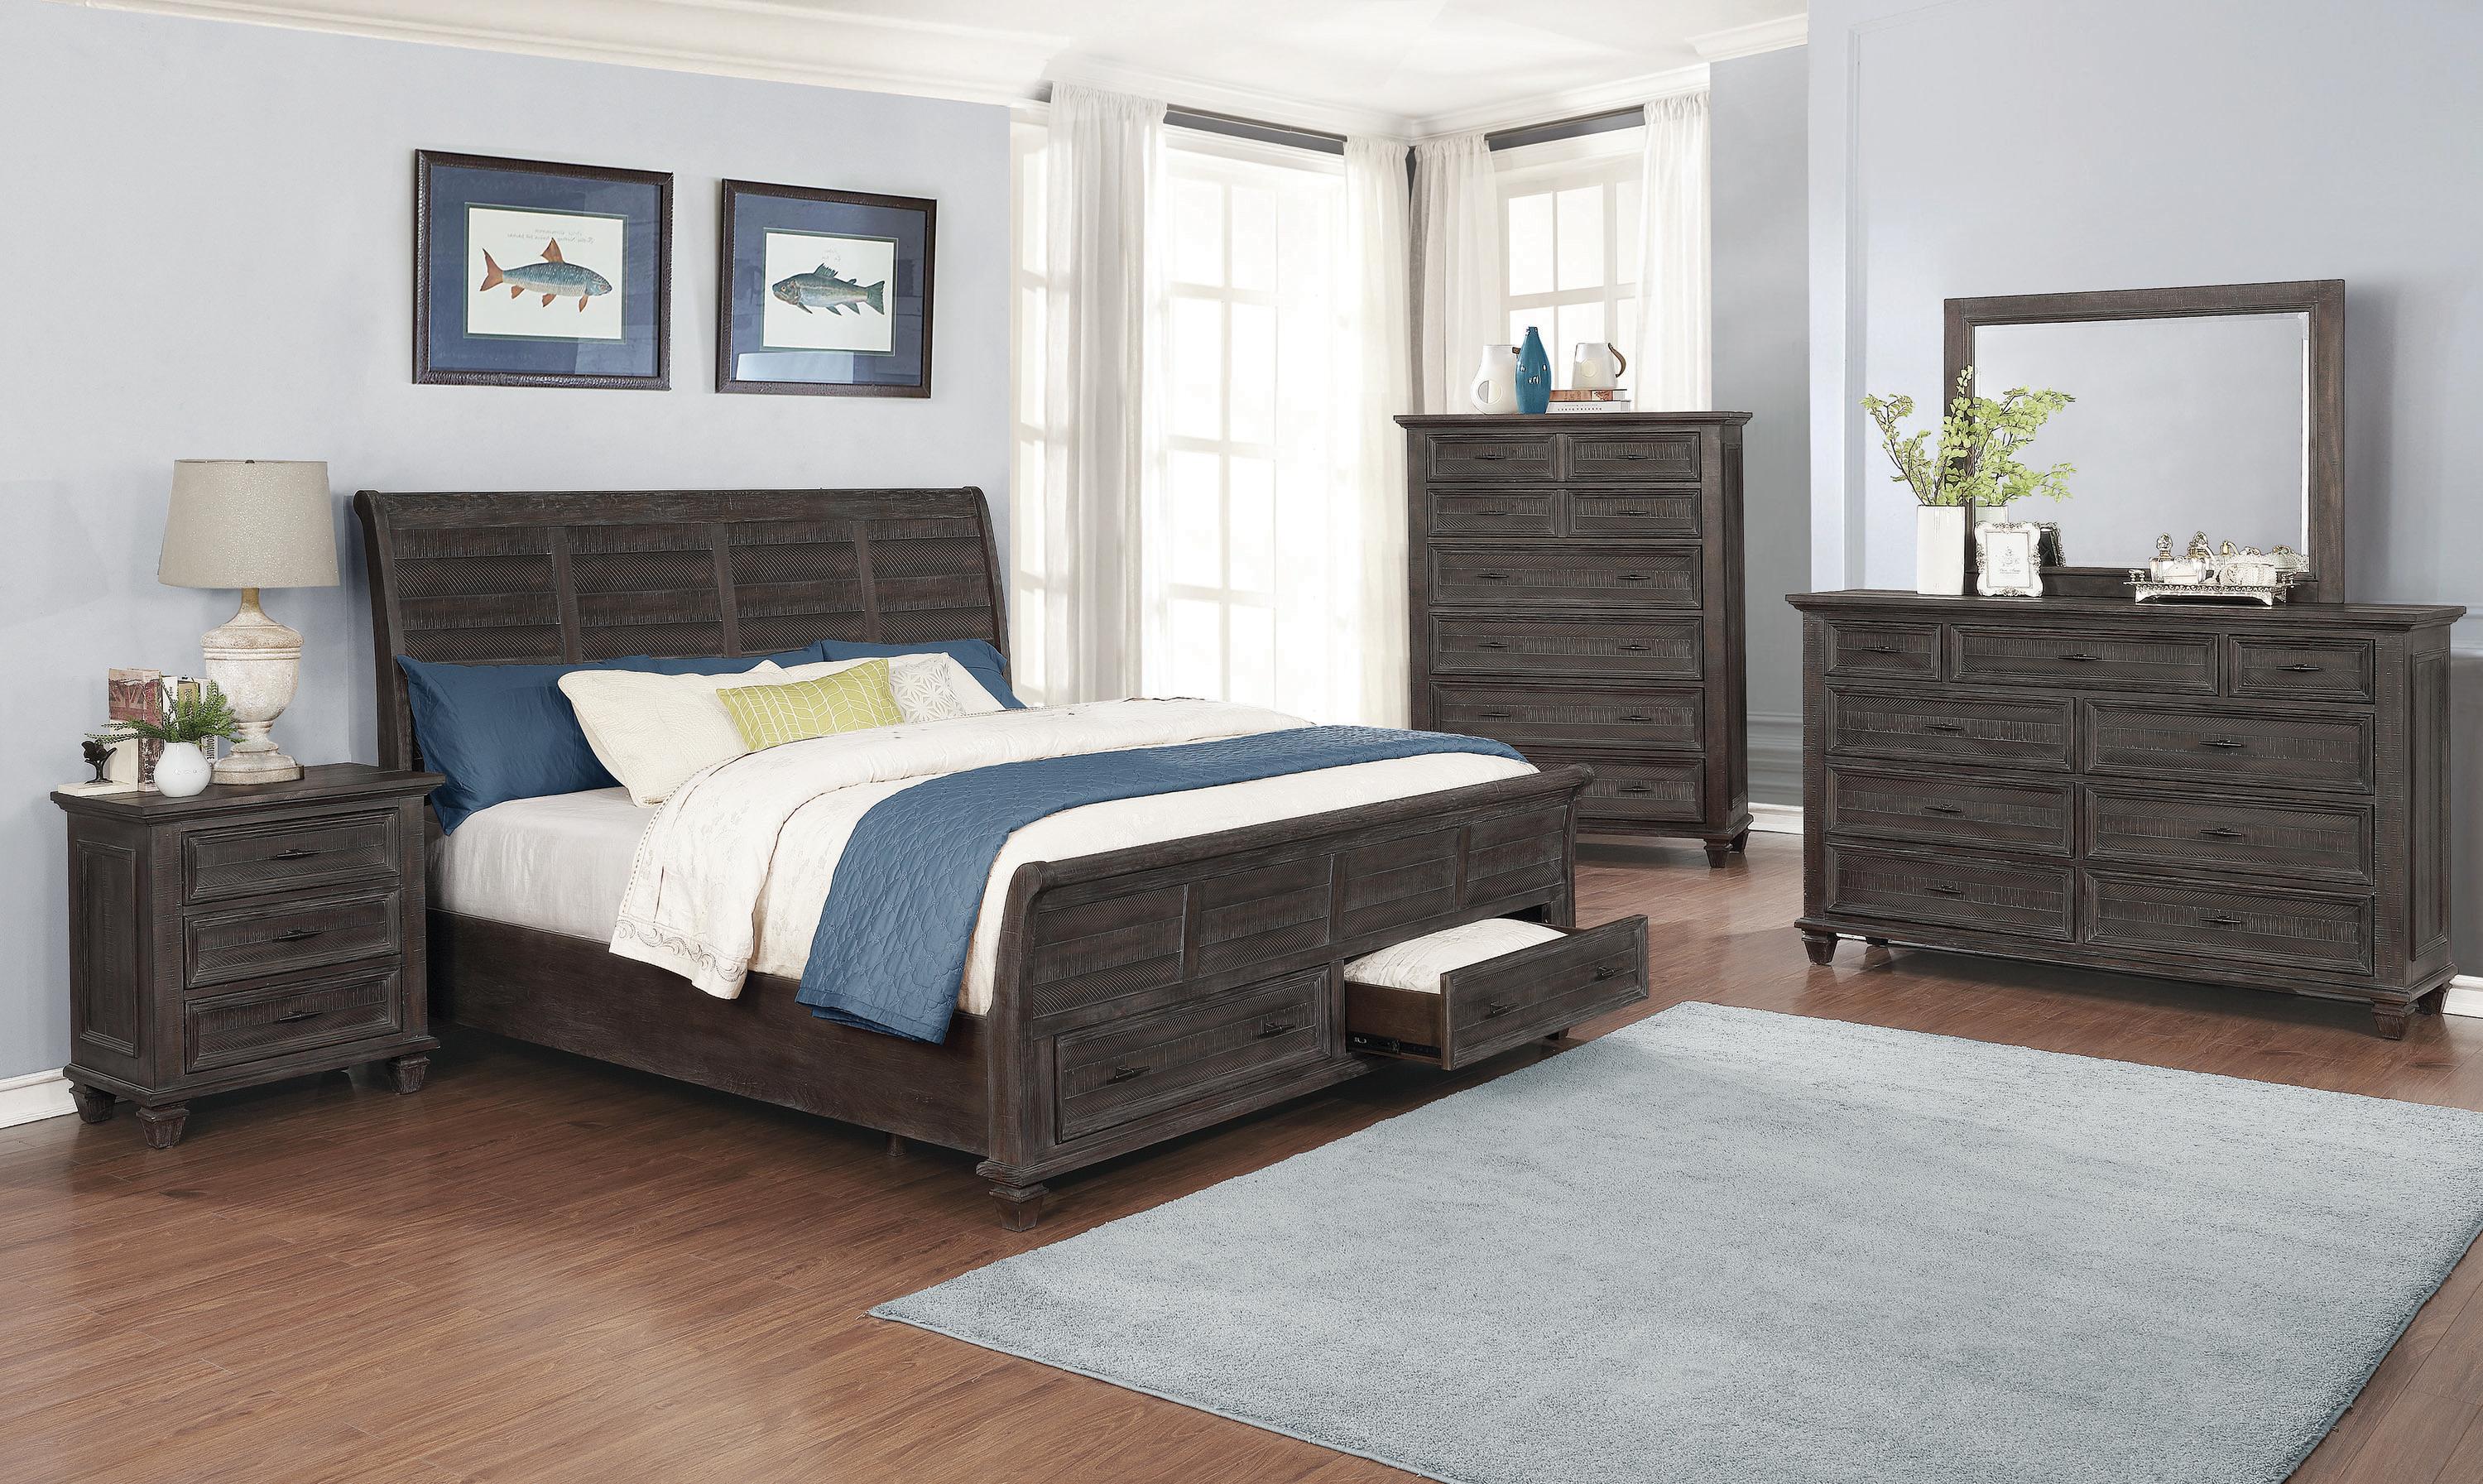 Transitional Bedroom Set 222880Q-3PC Atascadero 222880Q-3PC in Brown 